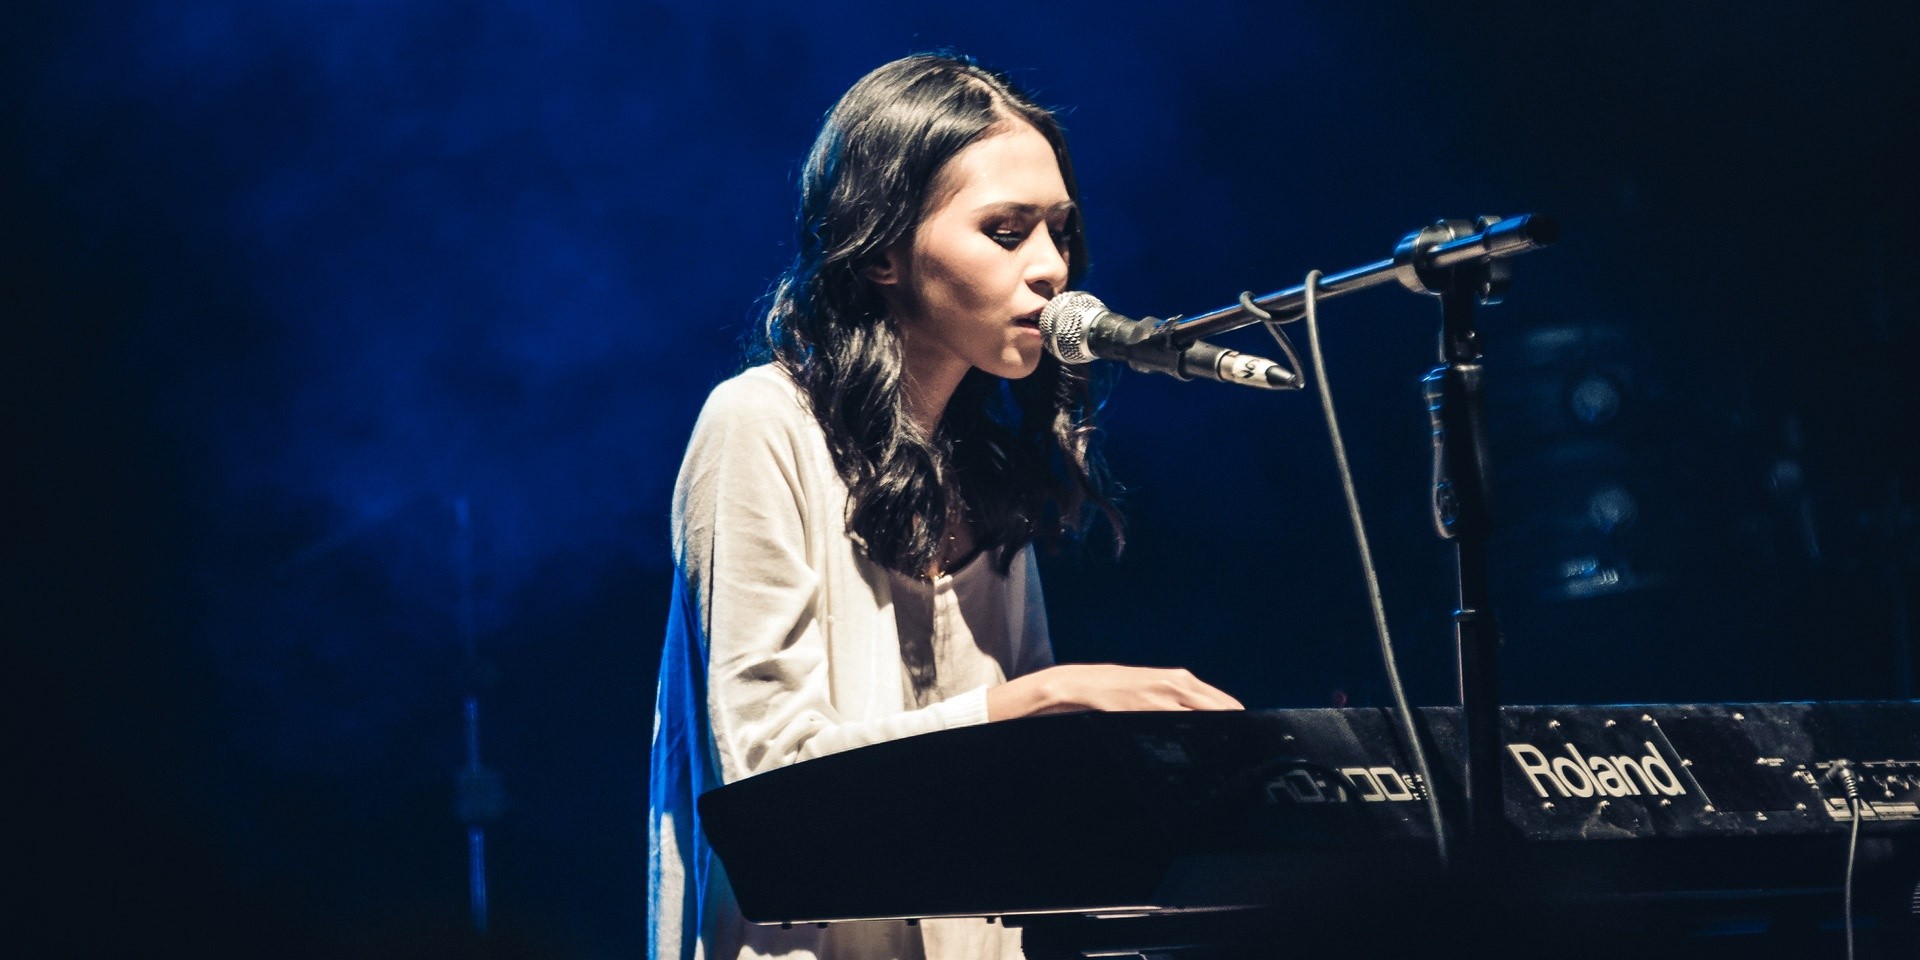 Clara Benin channels Lorde with 'Team' cover – listen